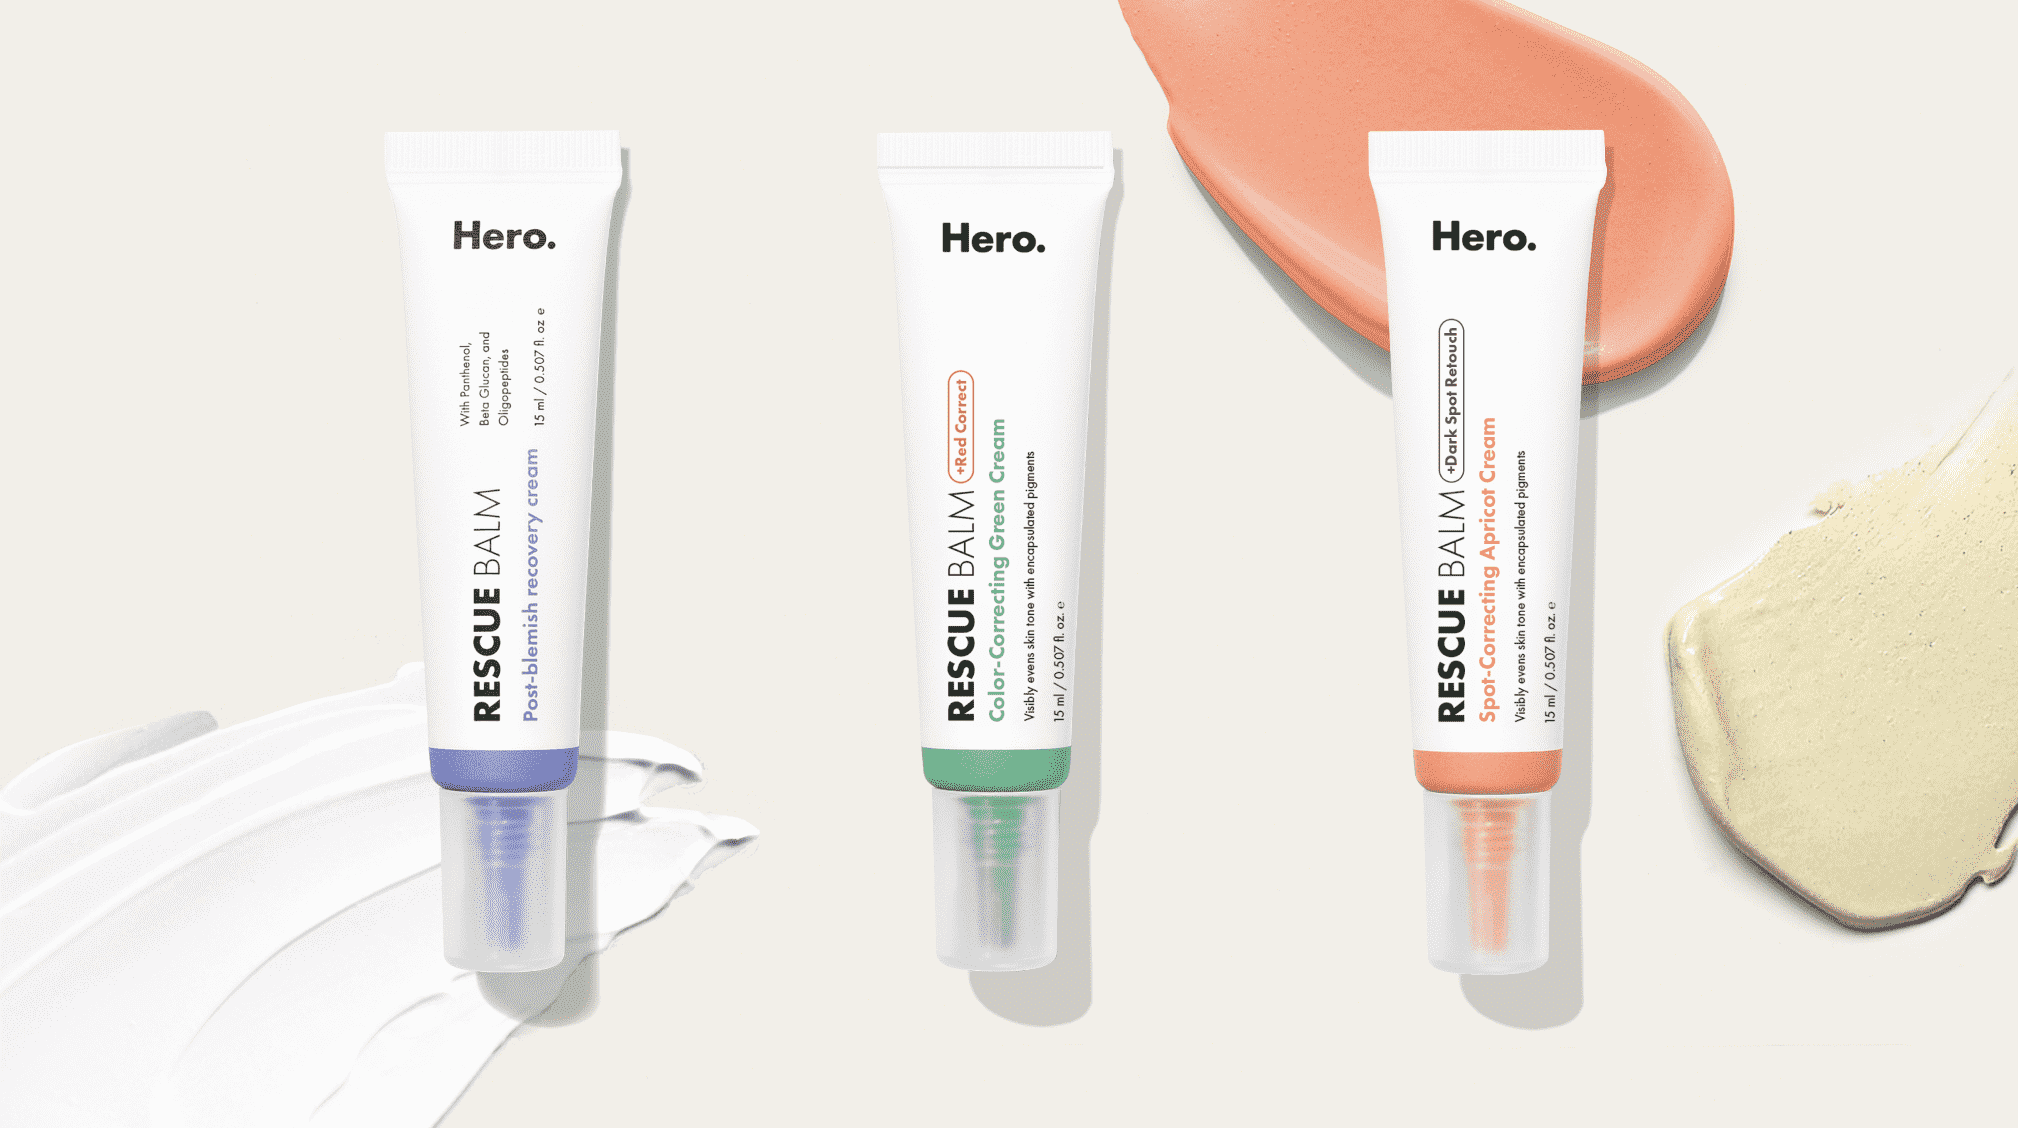 A Guide to Our Rescue Balm Collection